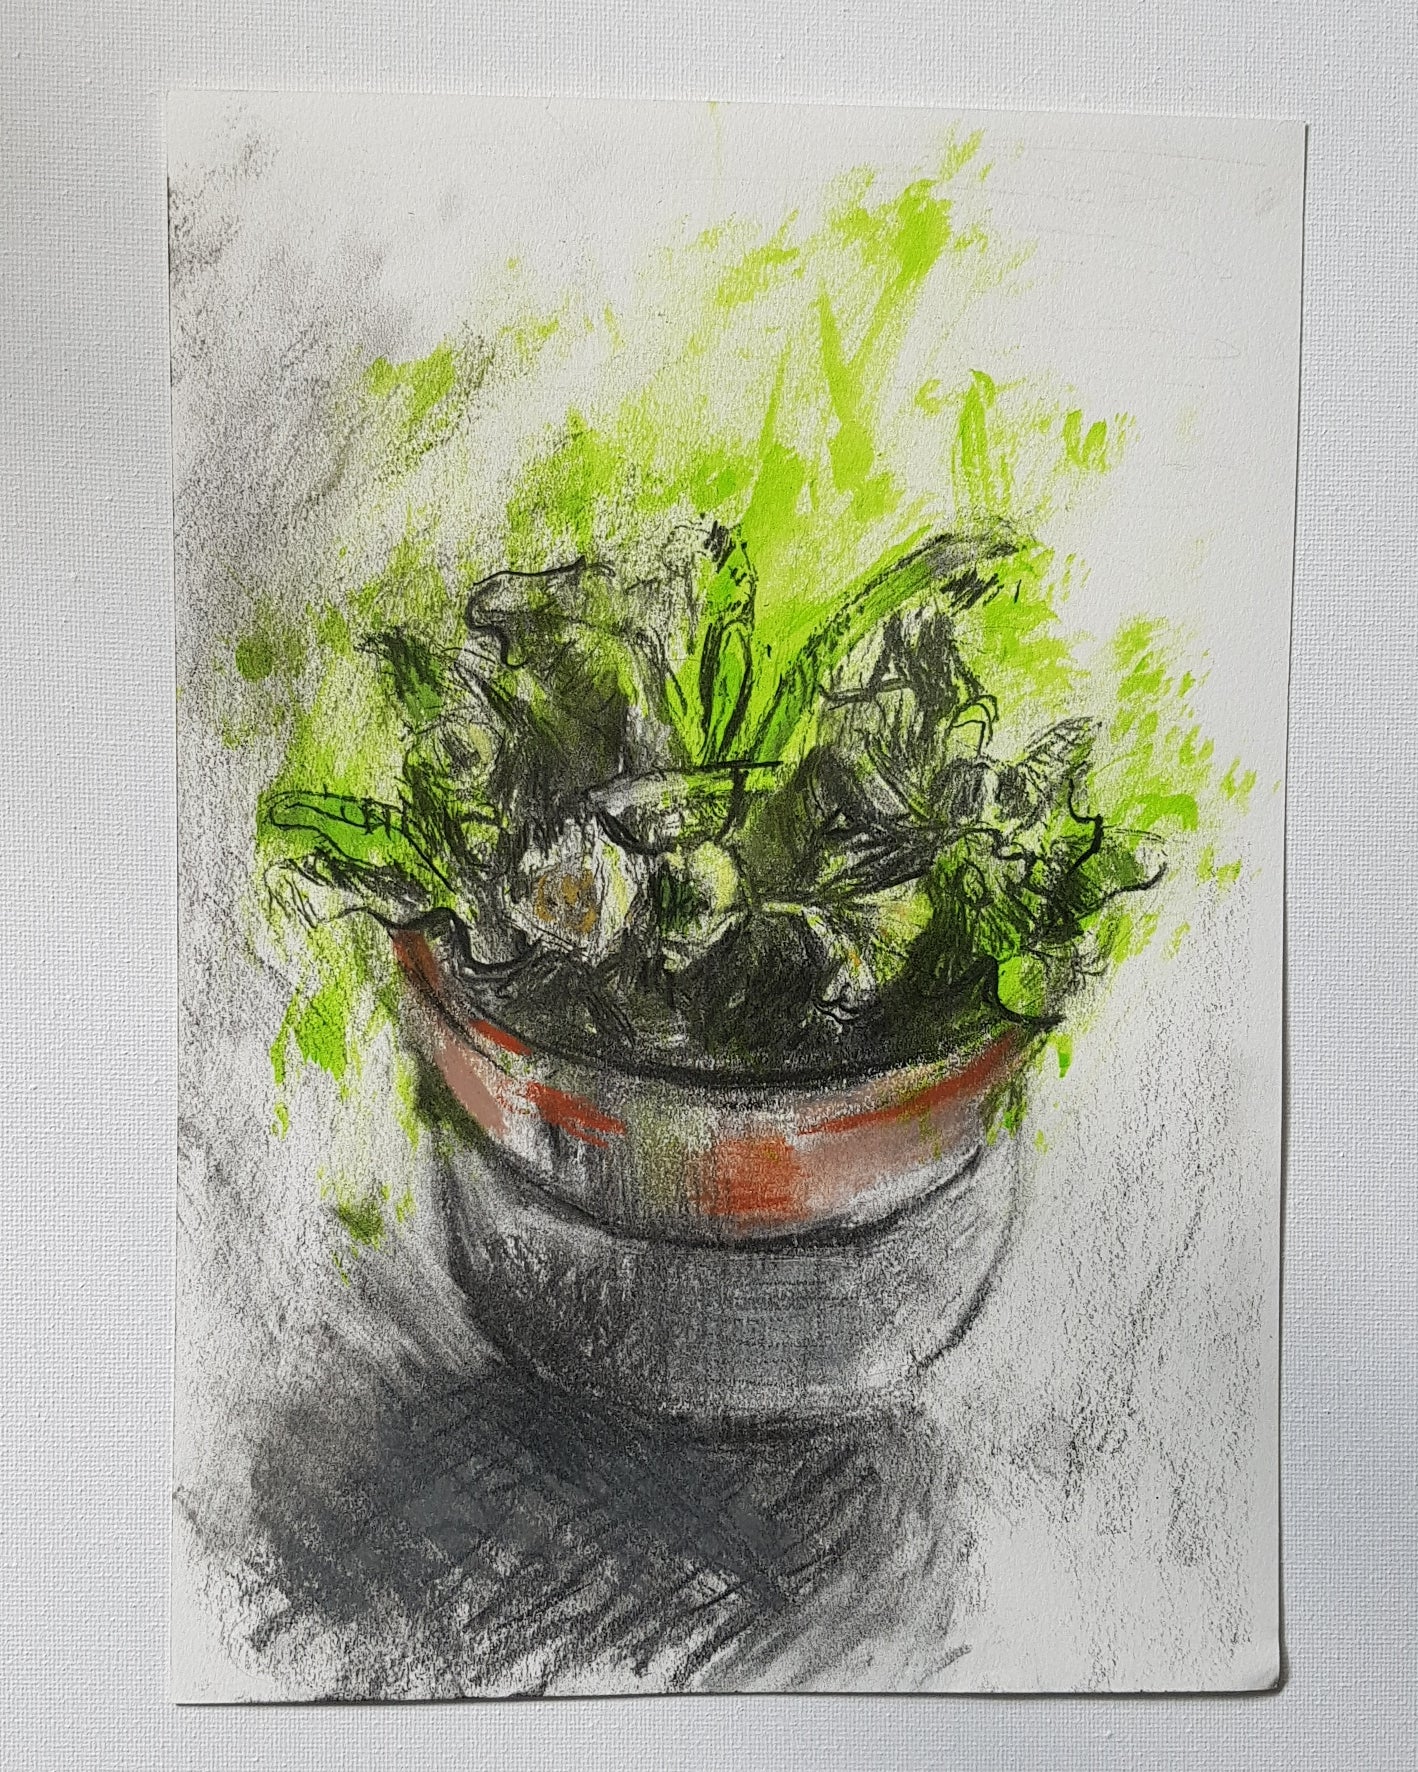 A4 size drawing of potted plant by Julia Laing, against a white background.